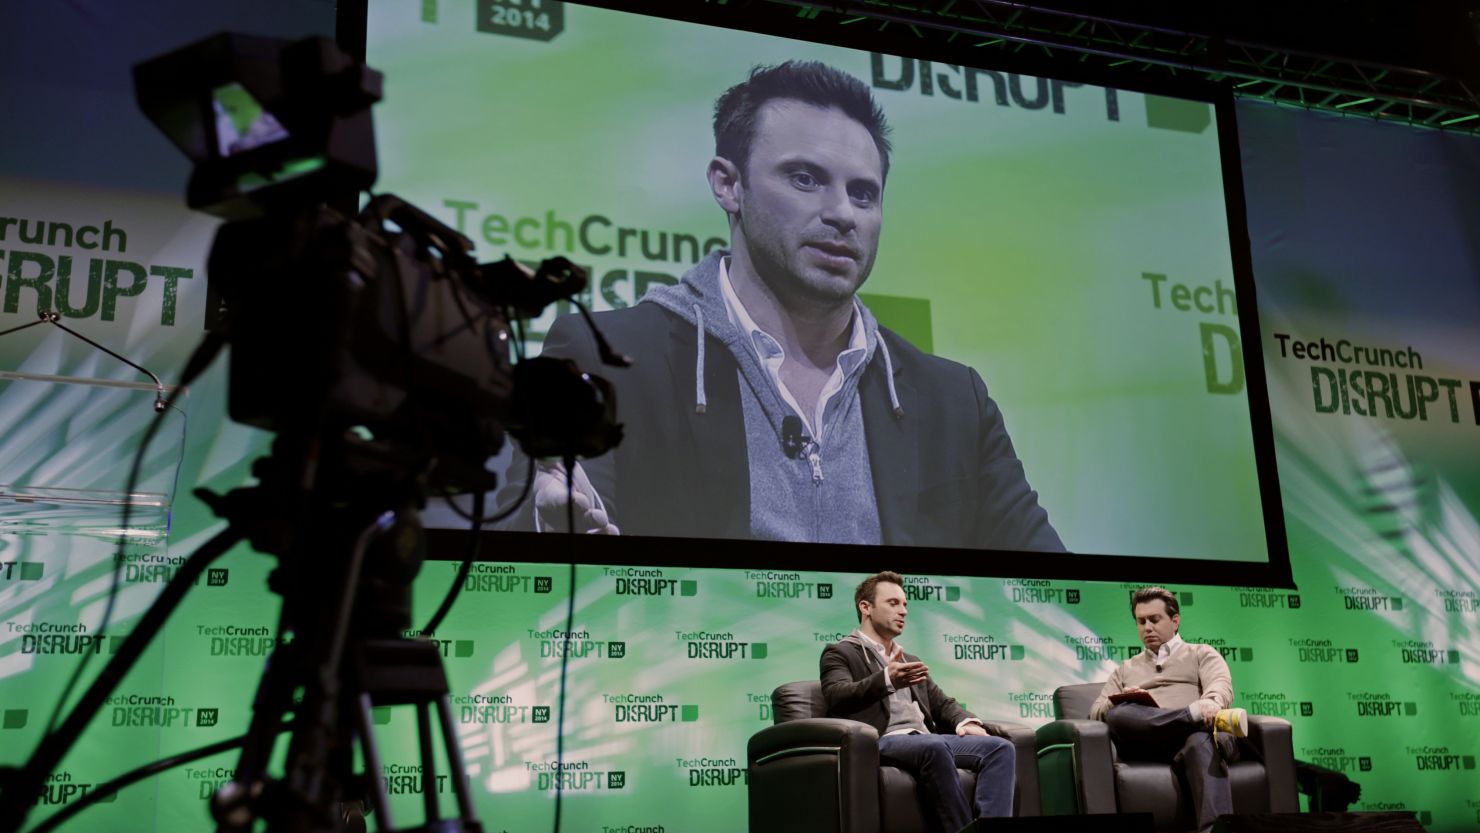 Brendan Iribe, CEO of Oculus VR Inc., left, speaks during the TechCrunch Disrupt NYC 2014 conference on Monday, May 5. 